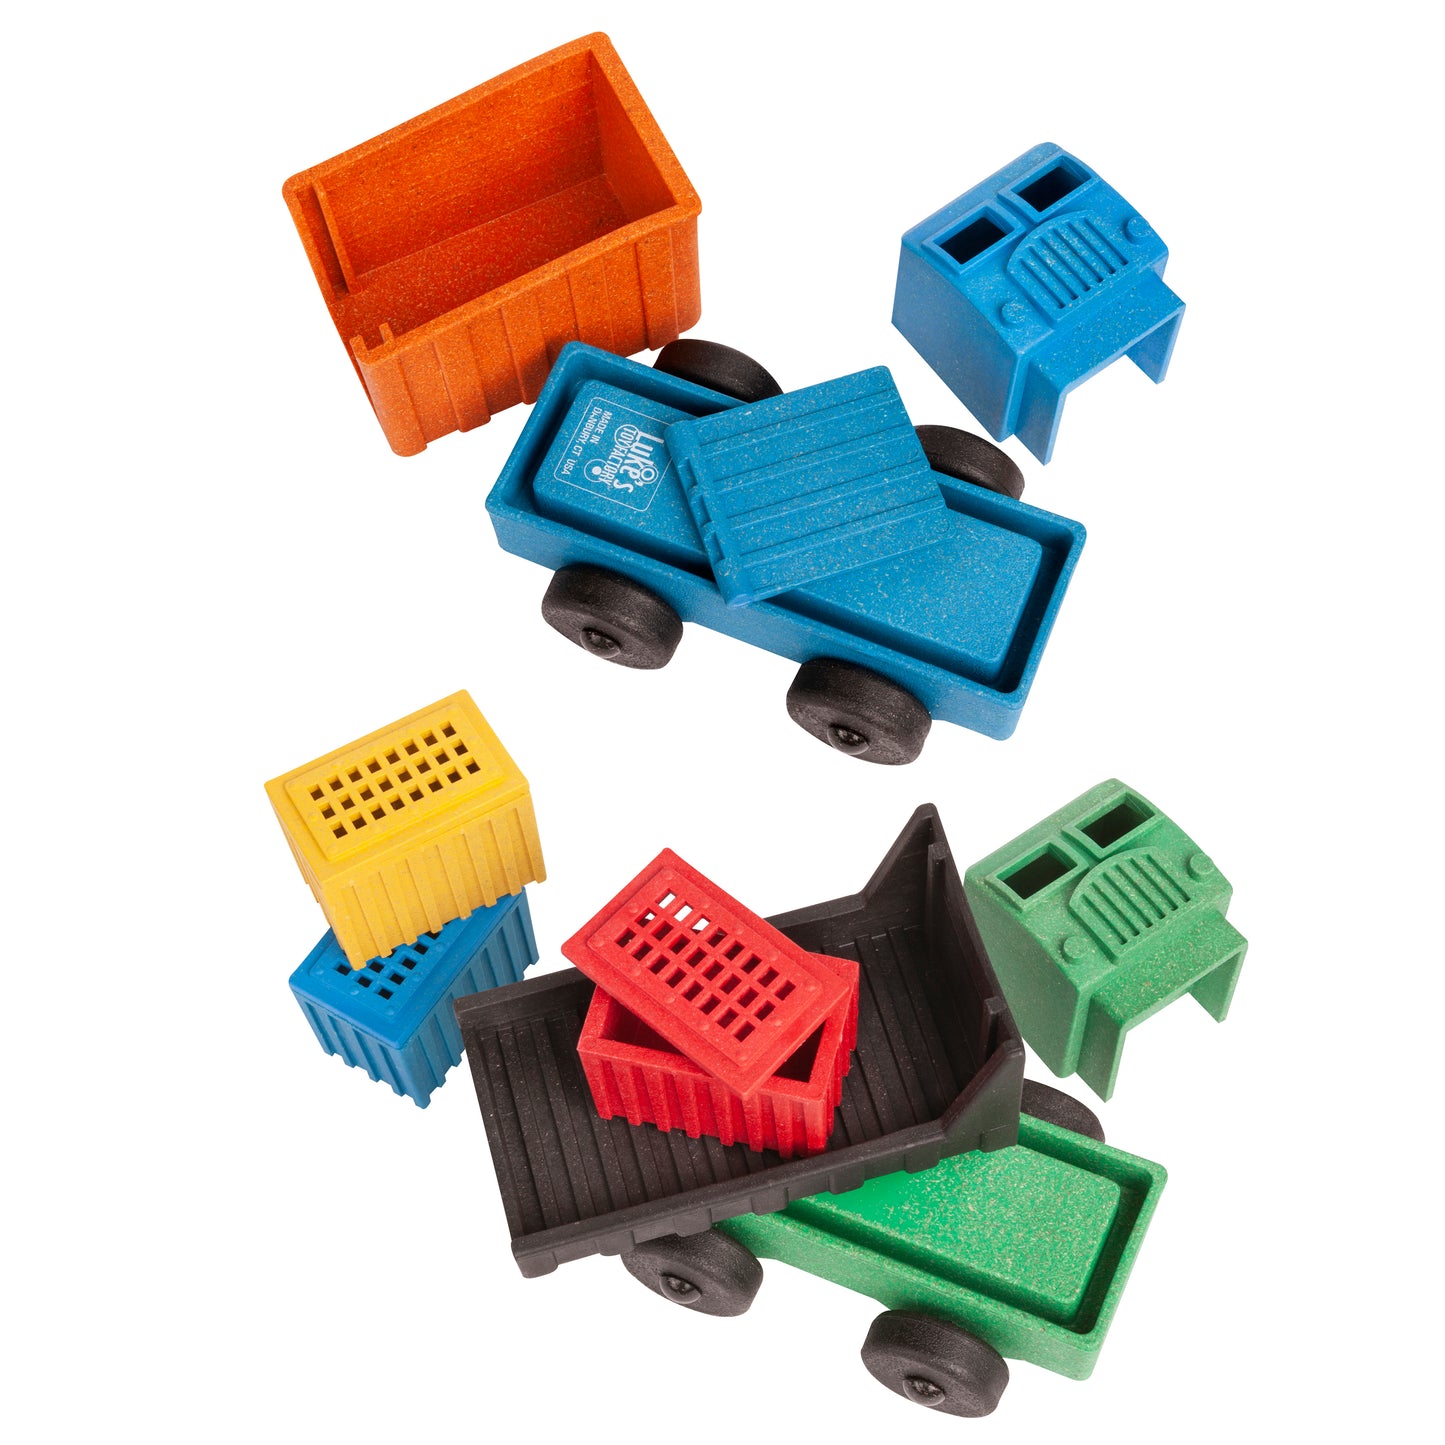 Luke's Toy Factory Dump Truck toy and Cargo Truck toy interchangeable puzzle pieces